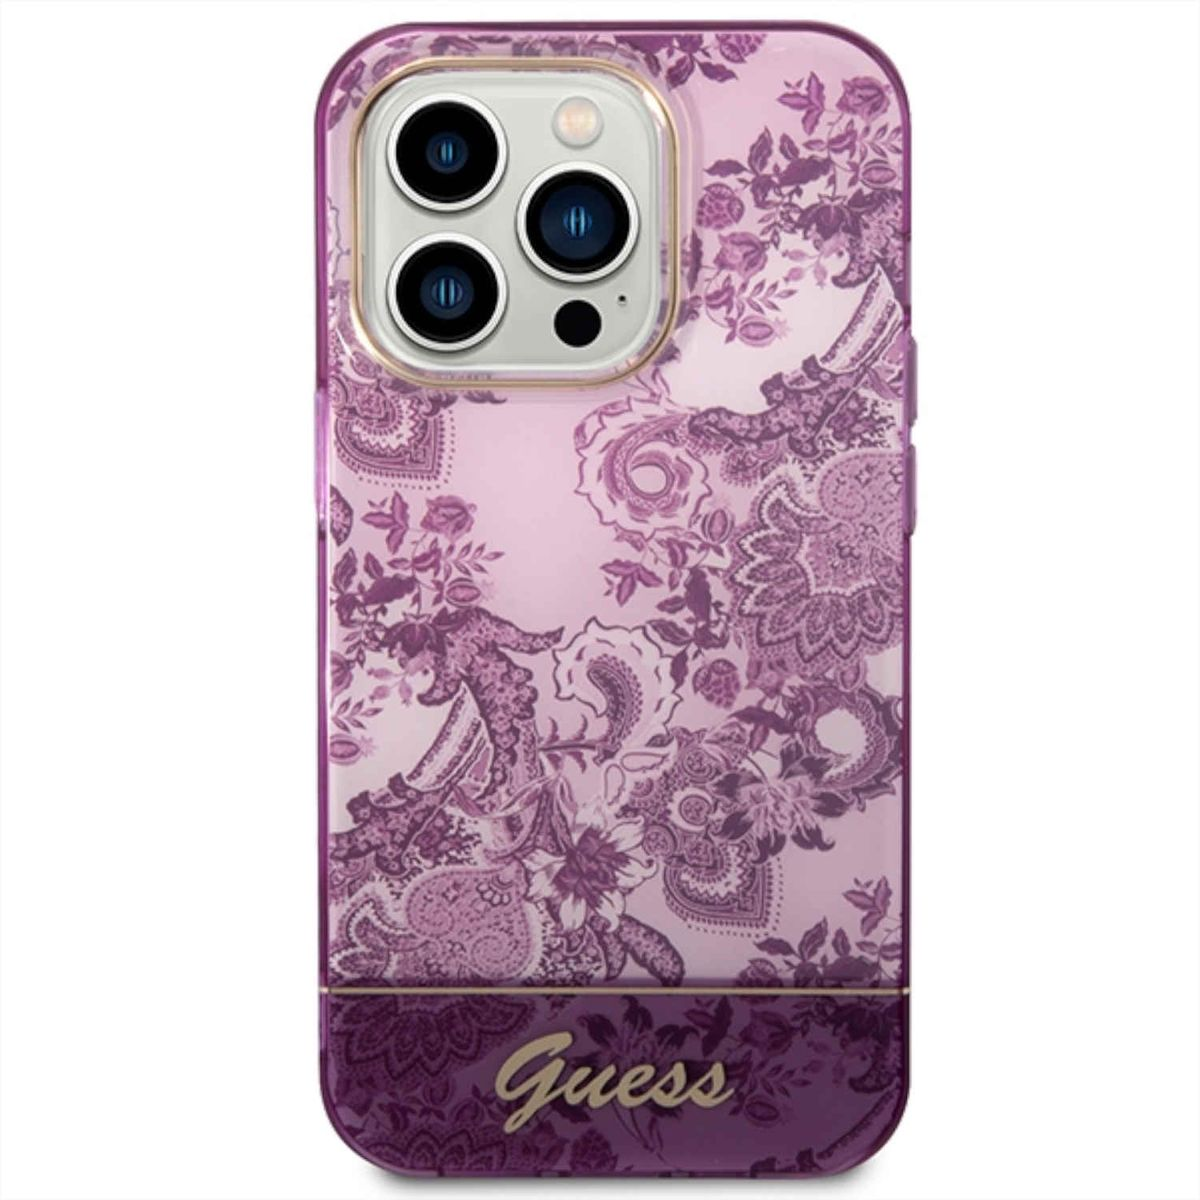 GUESS Design Muster TPU / Leder 14 PU Backcover, Apple, PC / iPhone Hülle, Pro, Lila